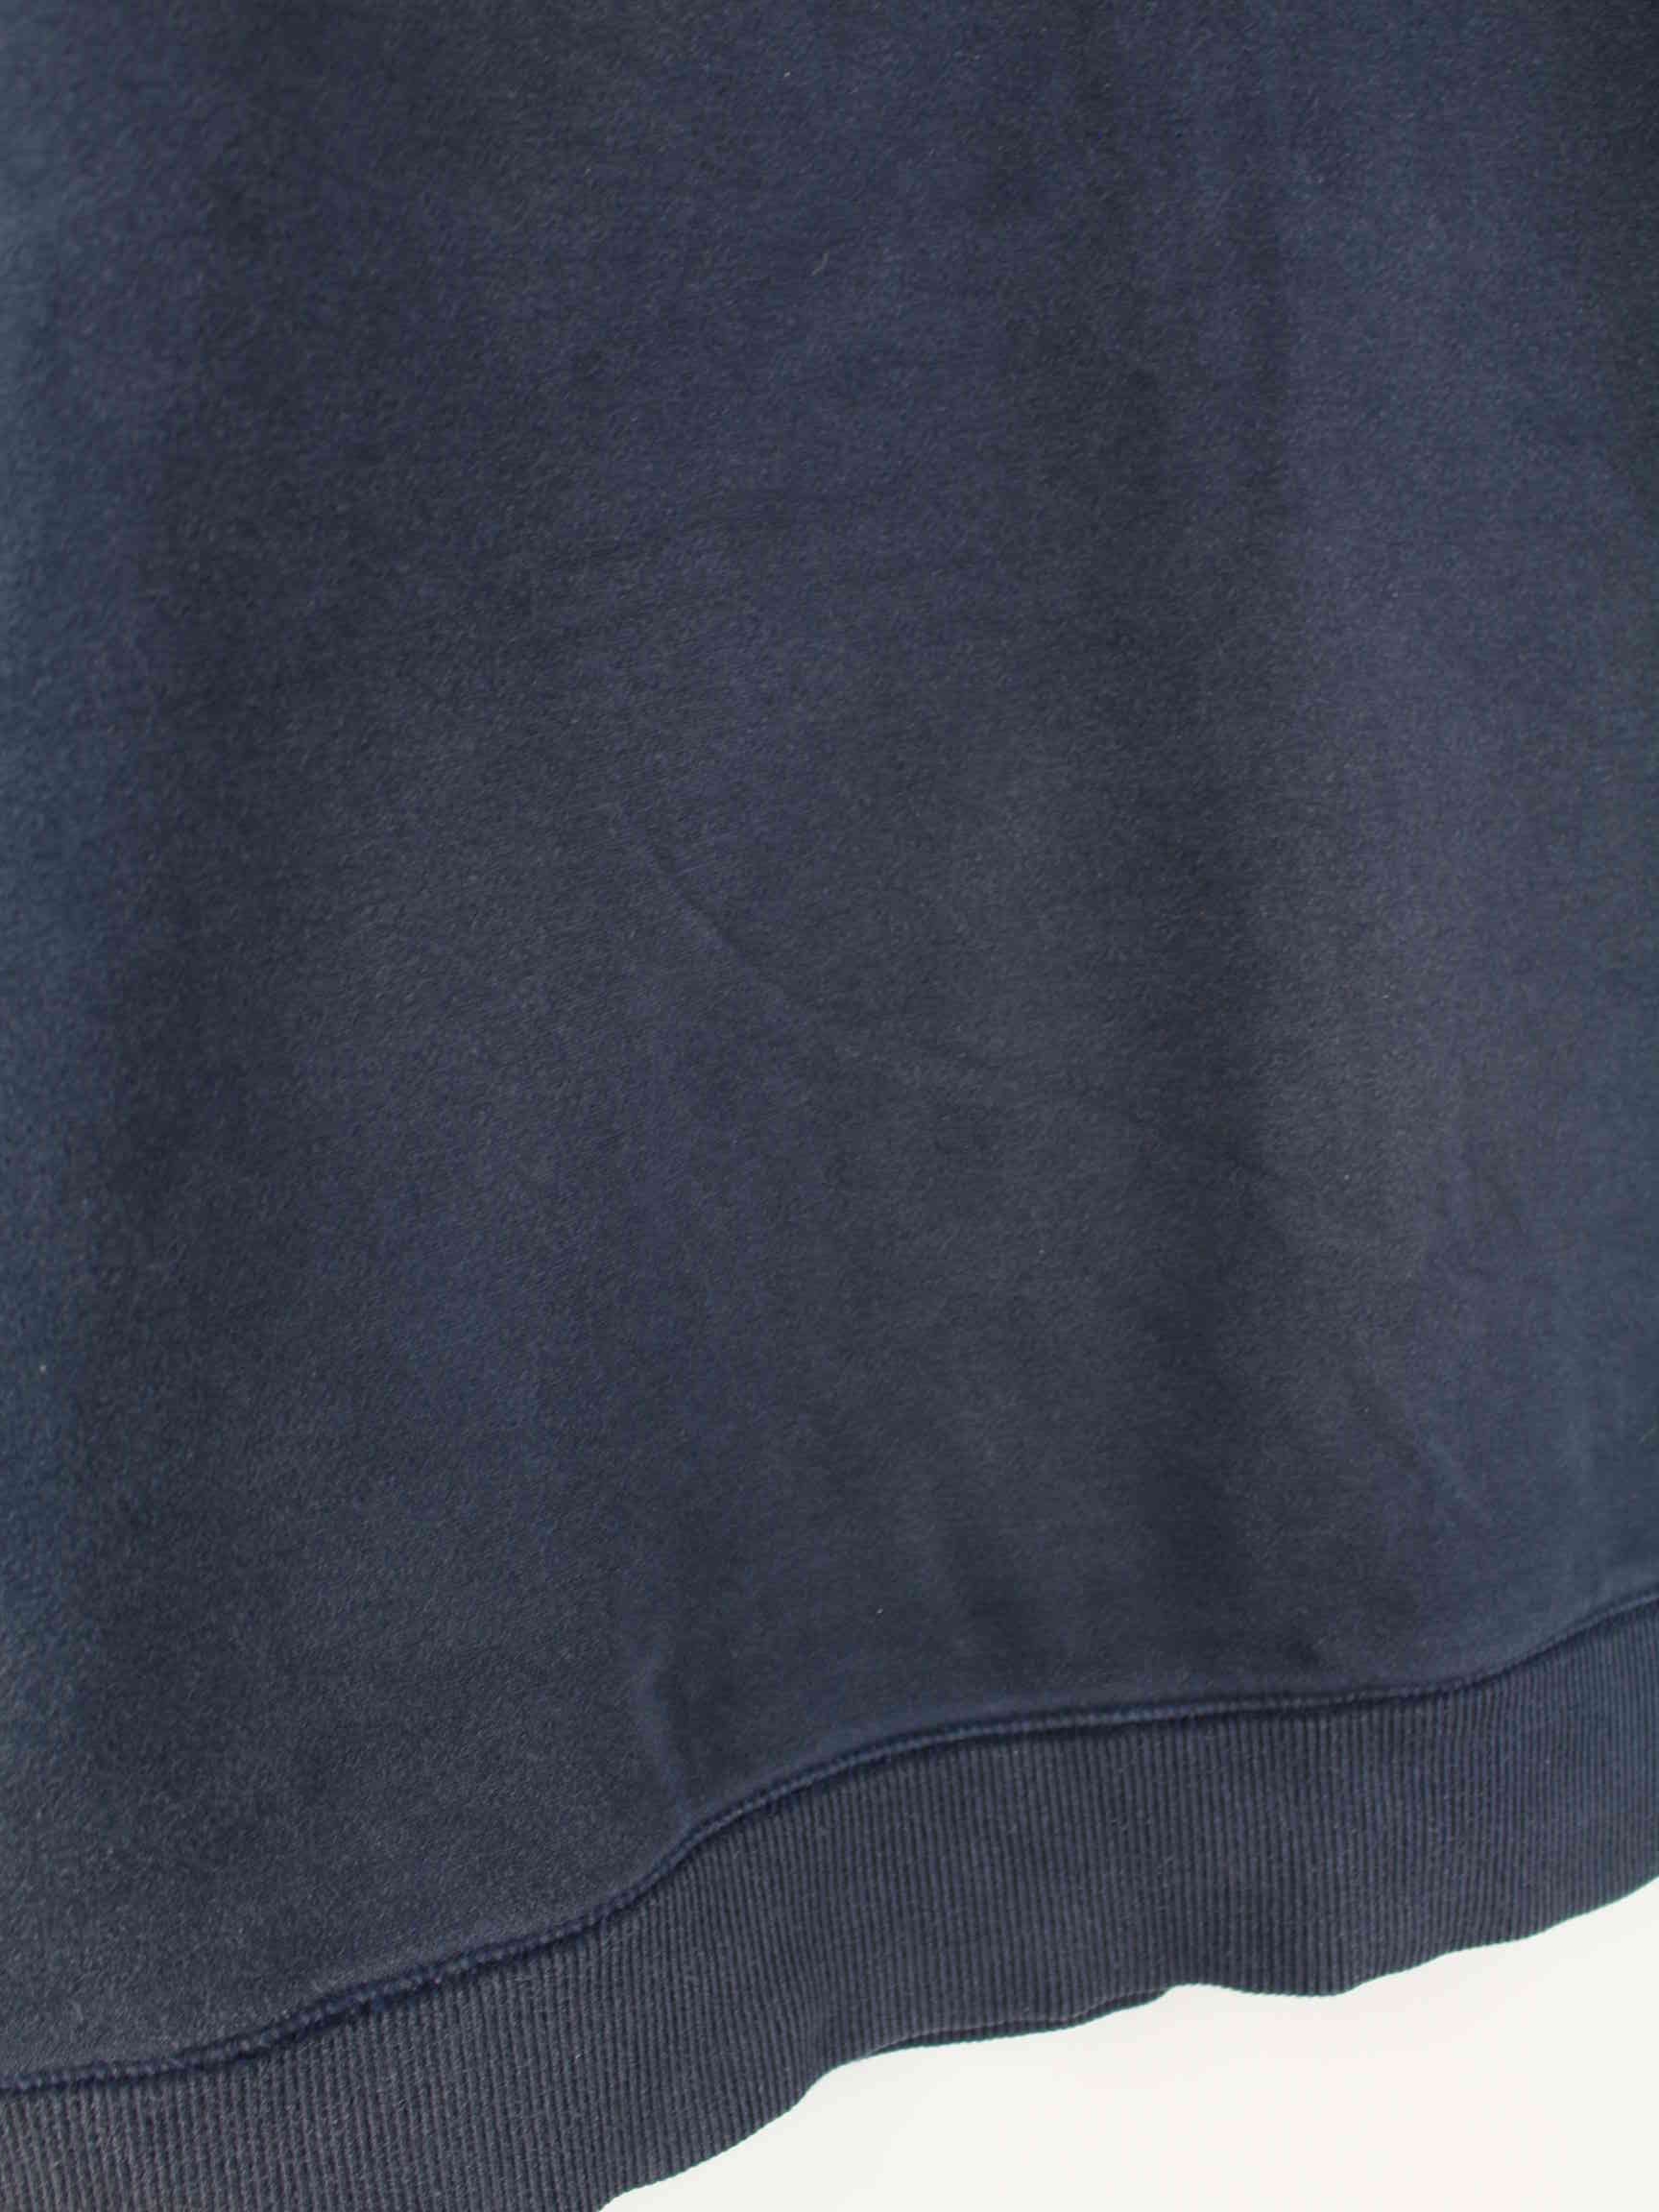 Nike Spellout Embroidered Faded Zip Hoodie Blau XL (detail image 5)